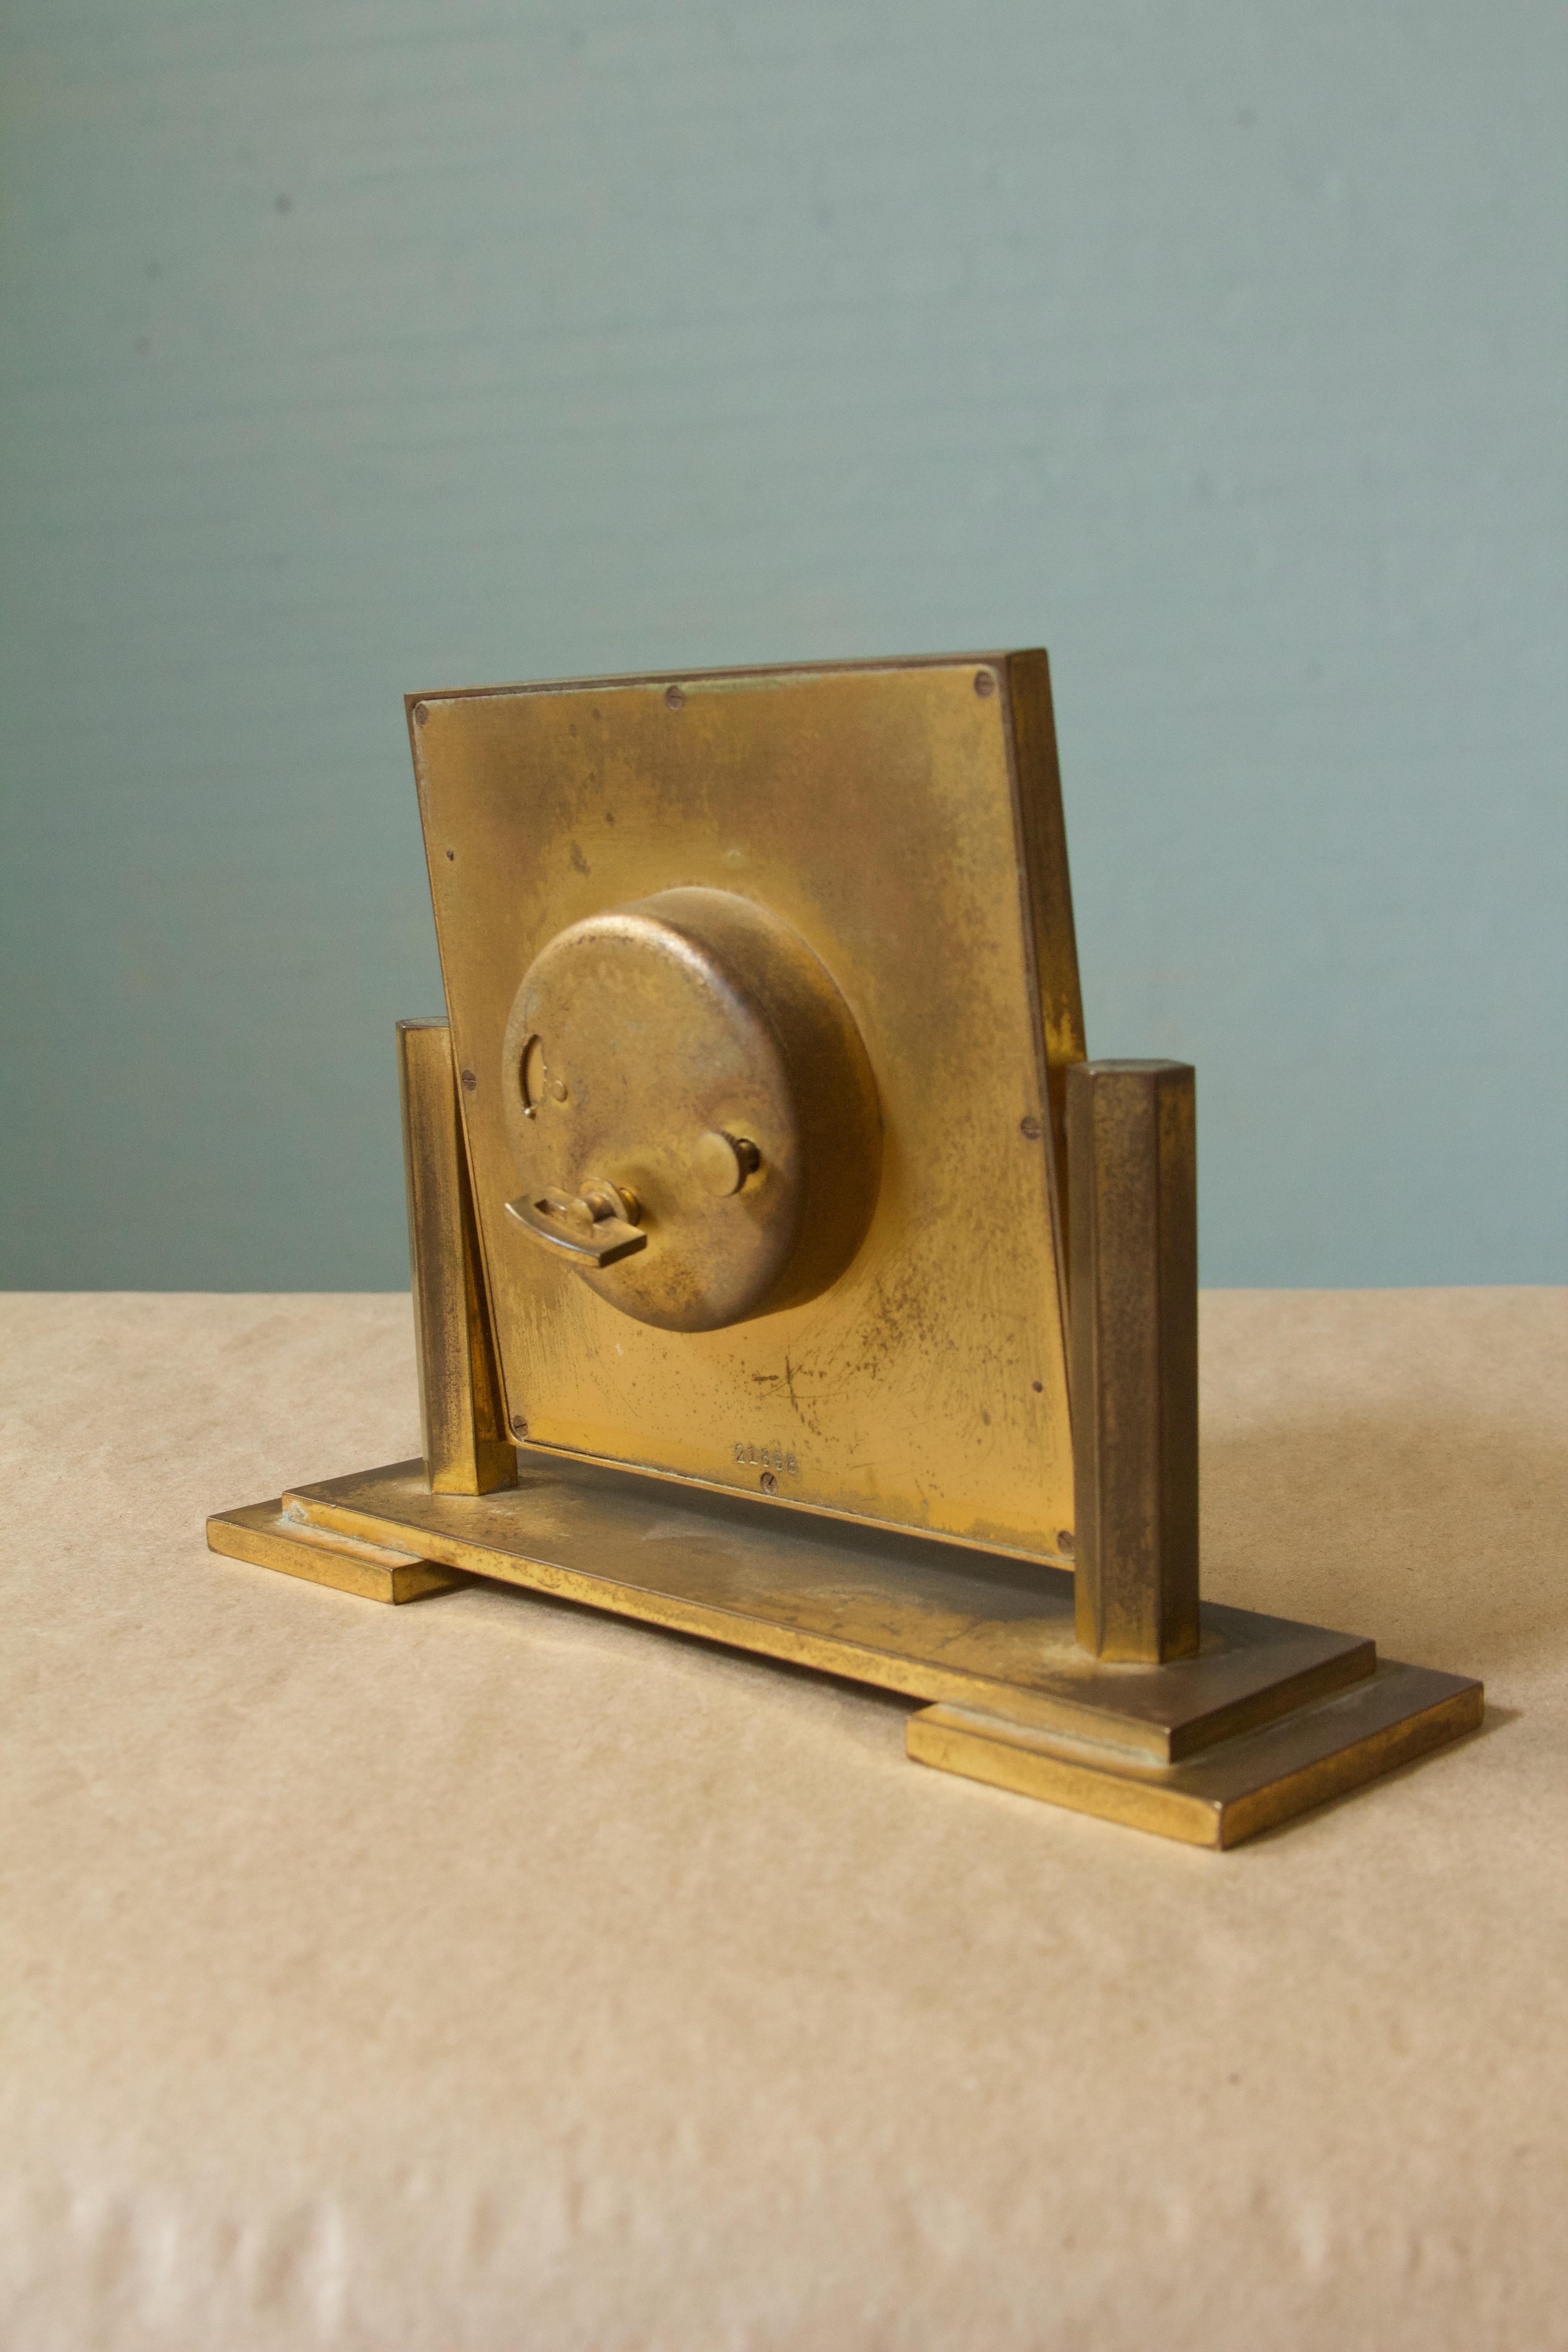 Patinated Vintage Tiffany and Co. Square Brass Desk Clock, 1970s For Sale